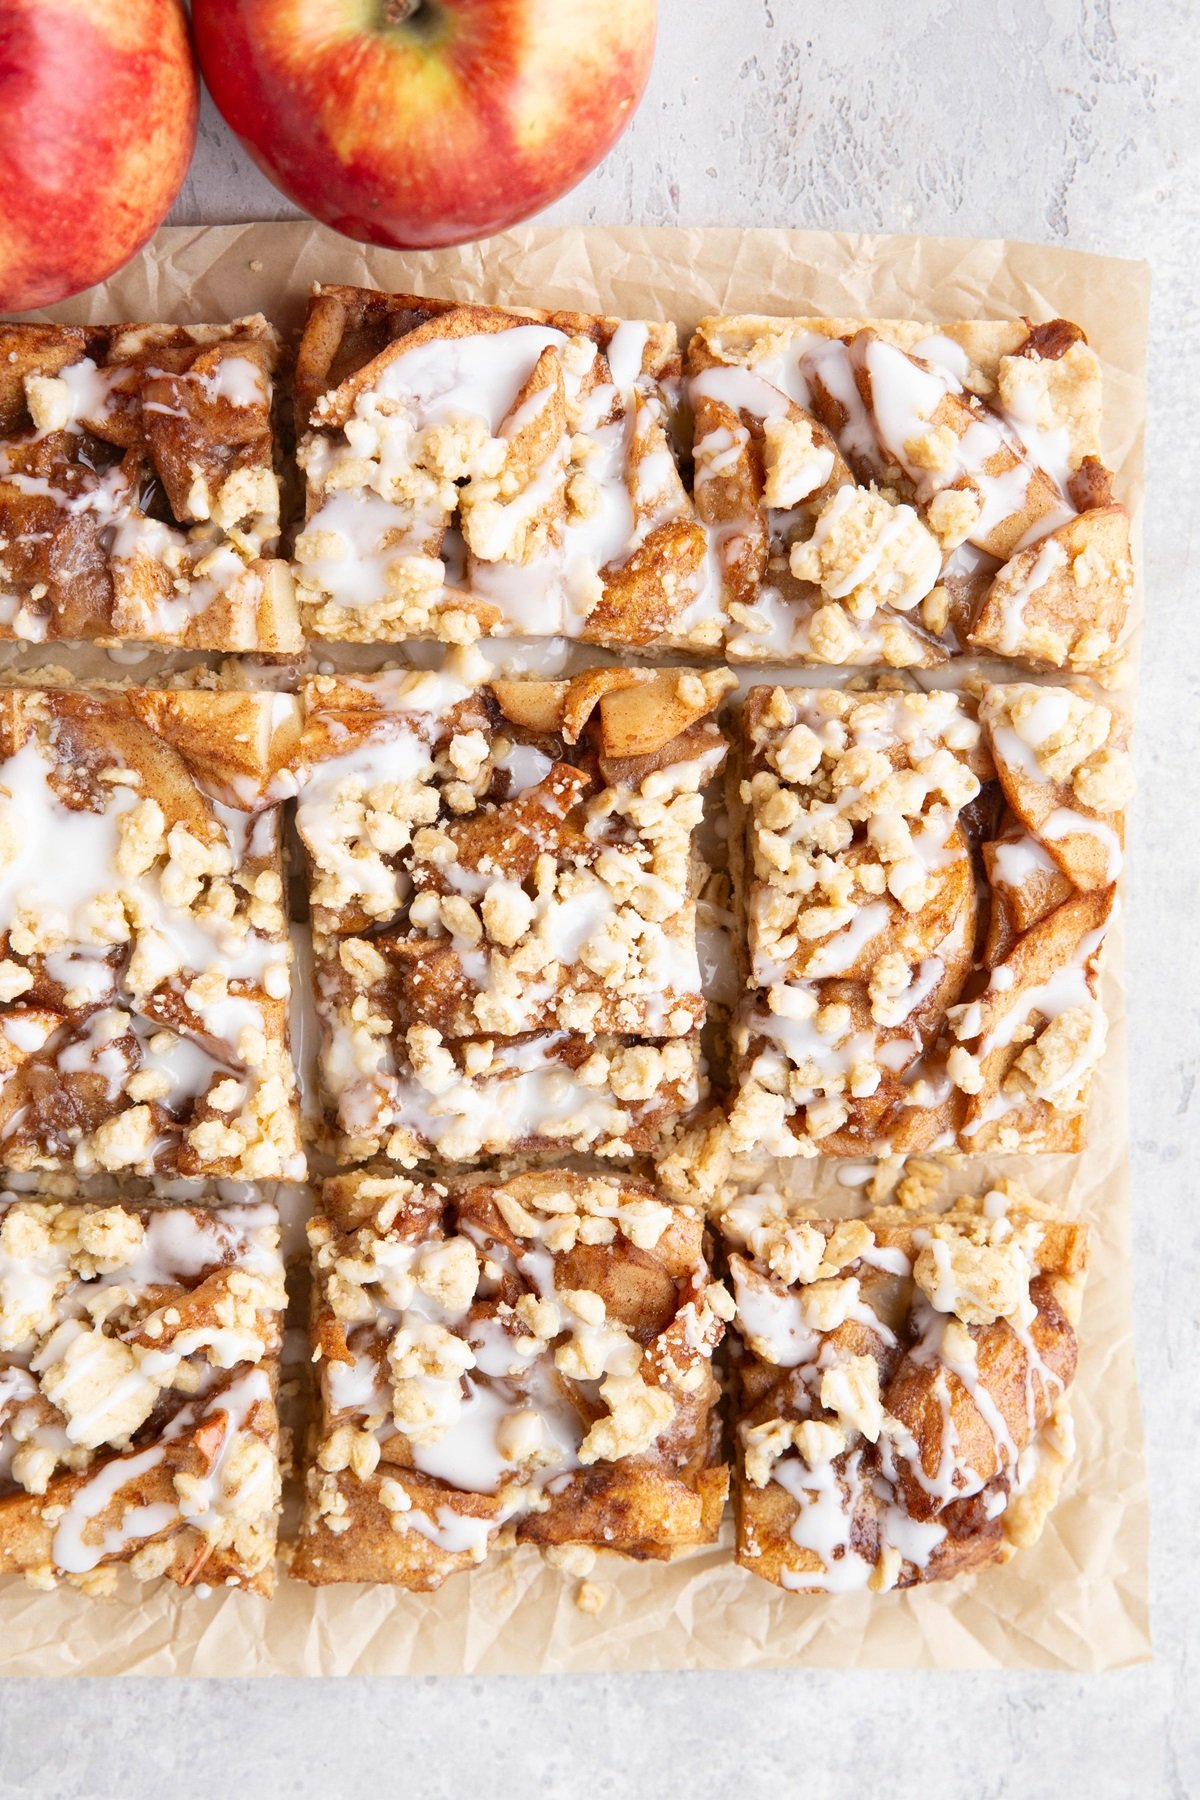 Apple crumb bars on a sheet of parchment paper, cut into slices and drizzled with glaze. Fresh apples to the side.